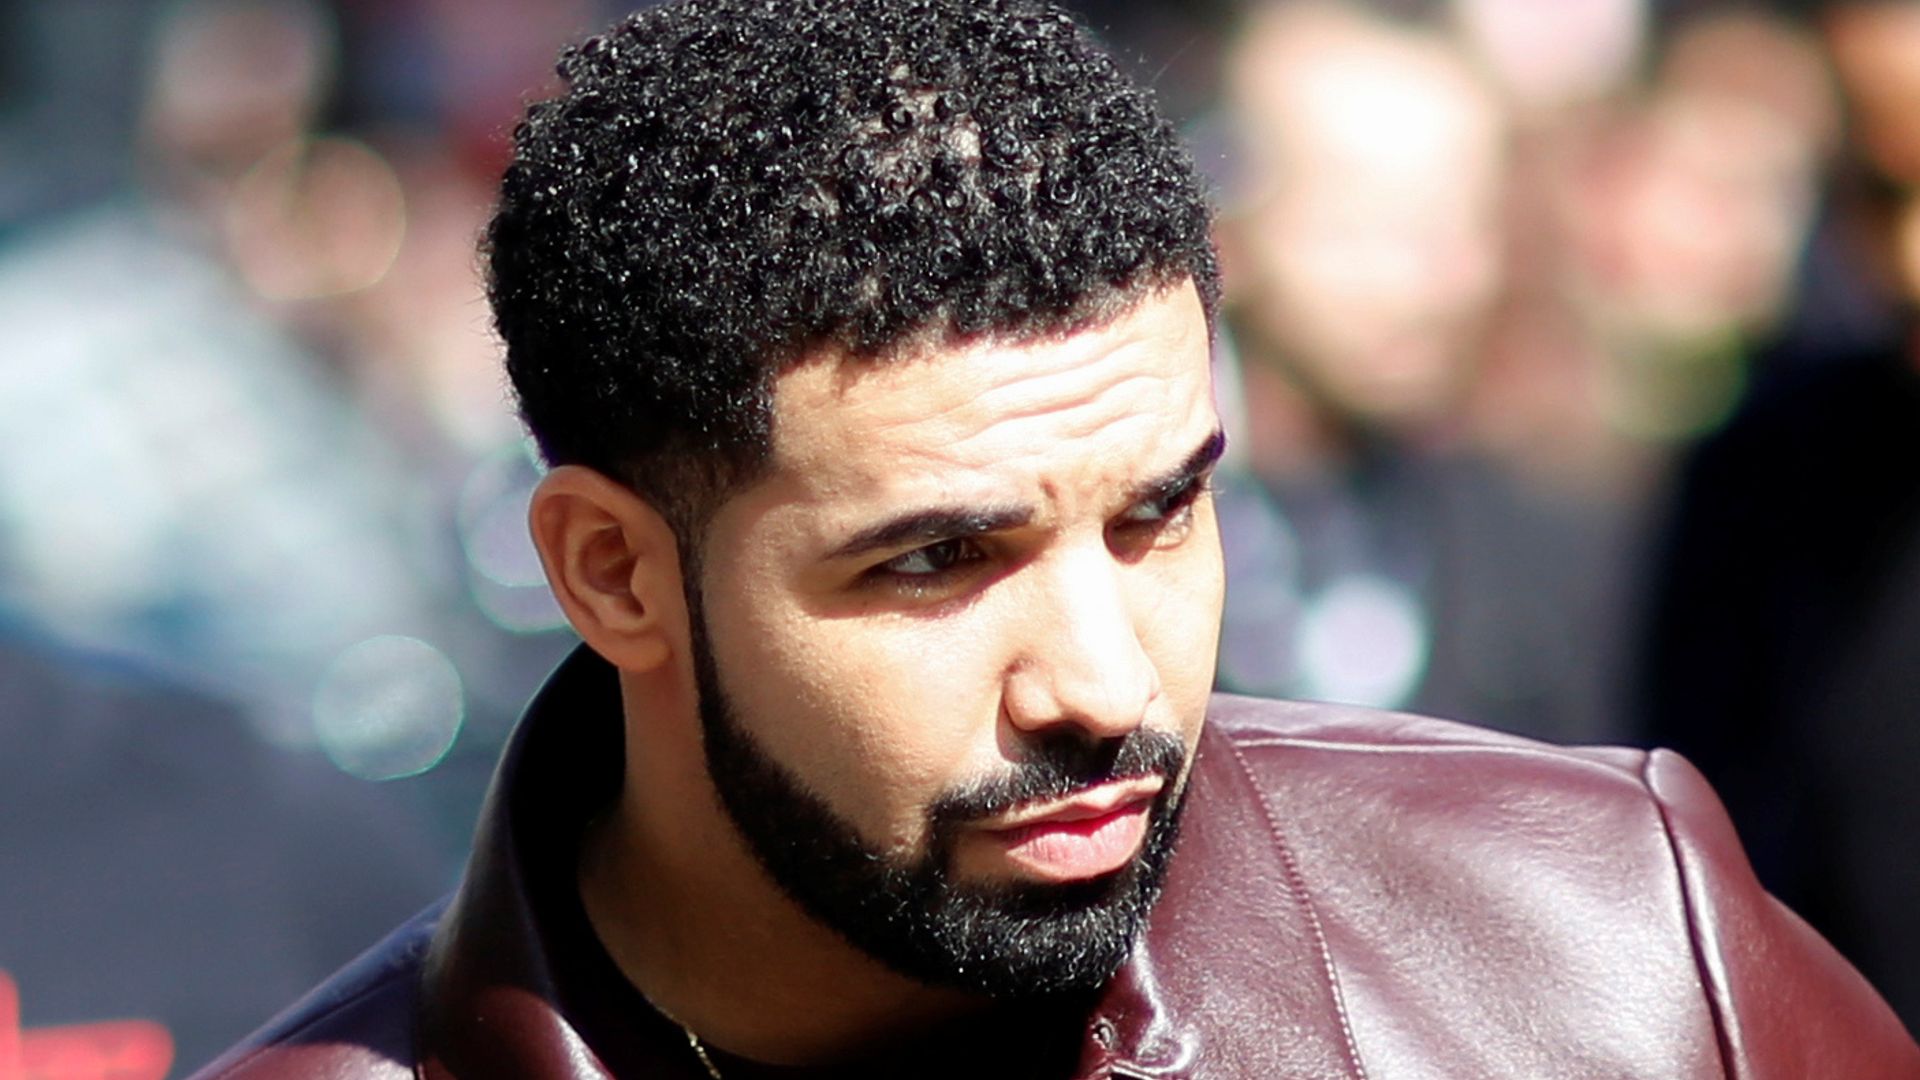 Shooting at rapper Drake's mansion leaves security guard seriously injured